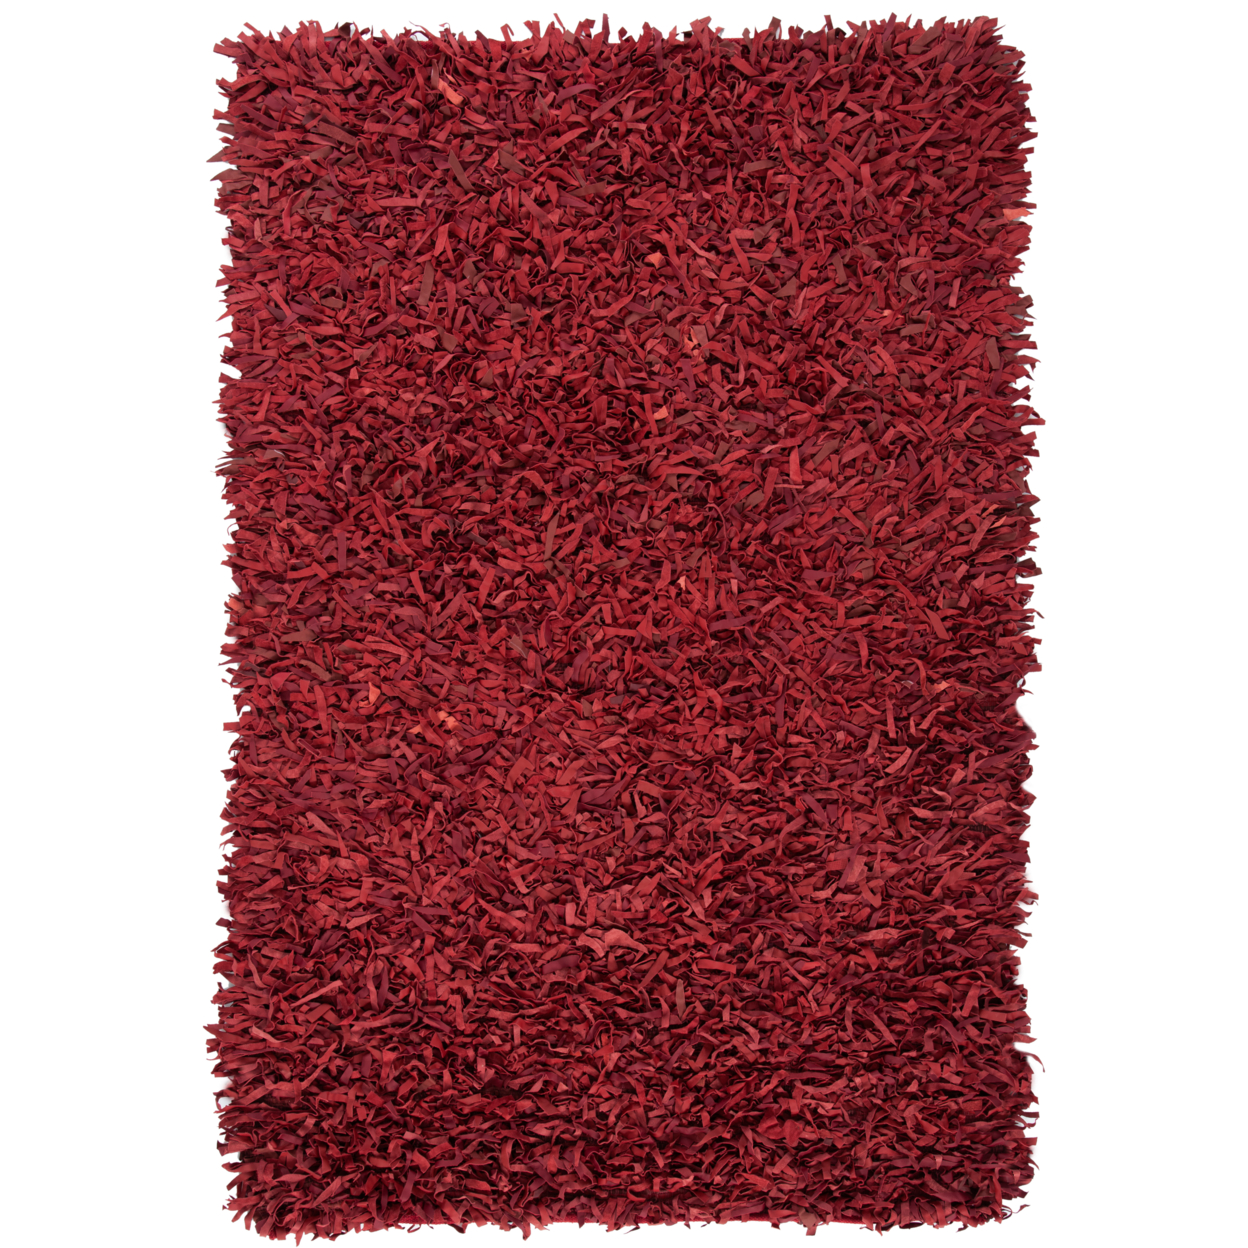 SAFAVIEH Leather Shag LSG601D Hand-knotted Red Rug - 5' X 8'